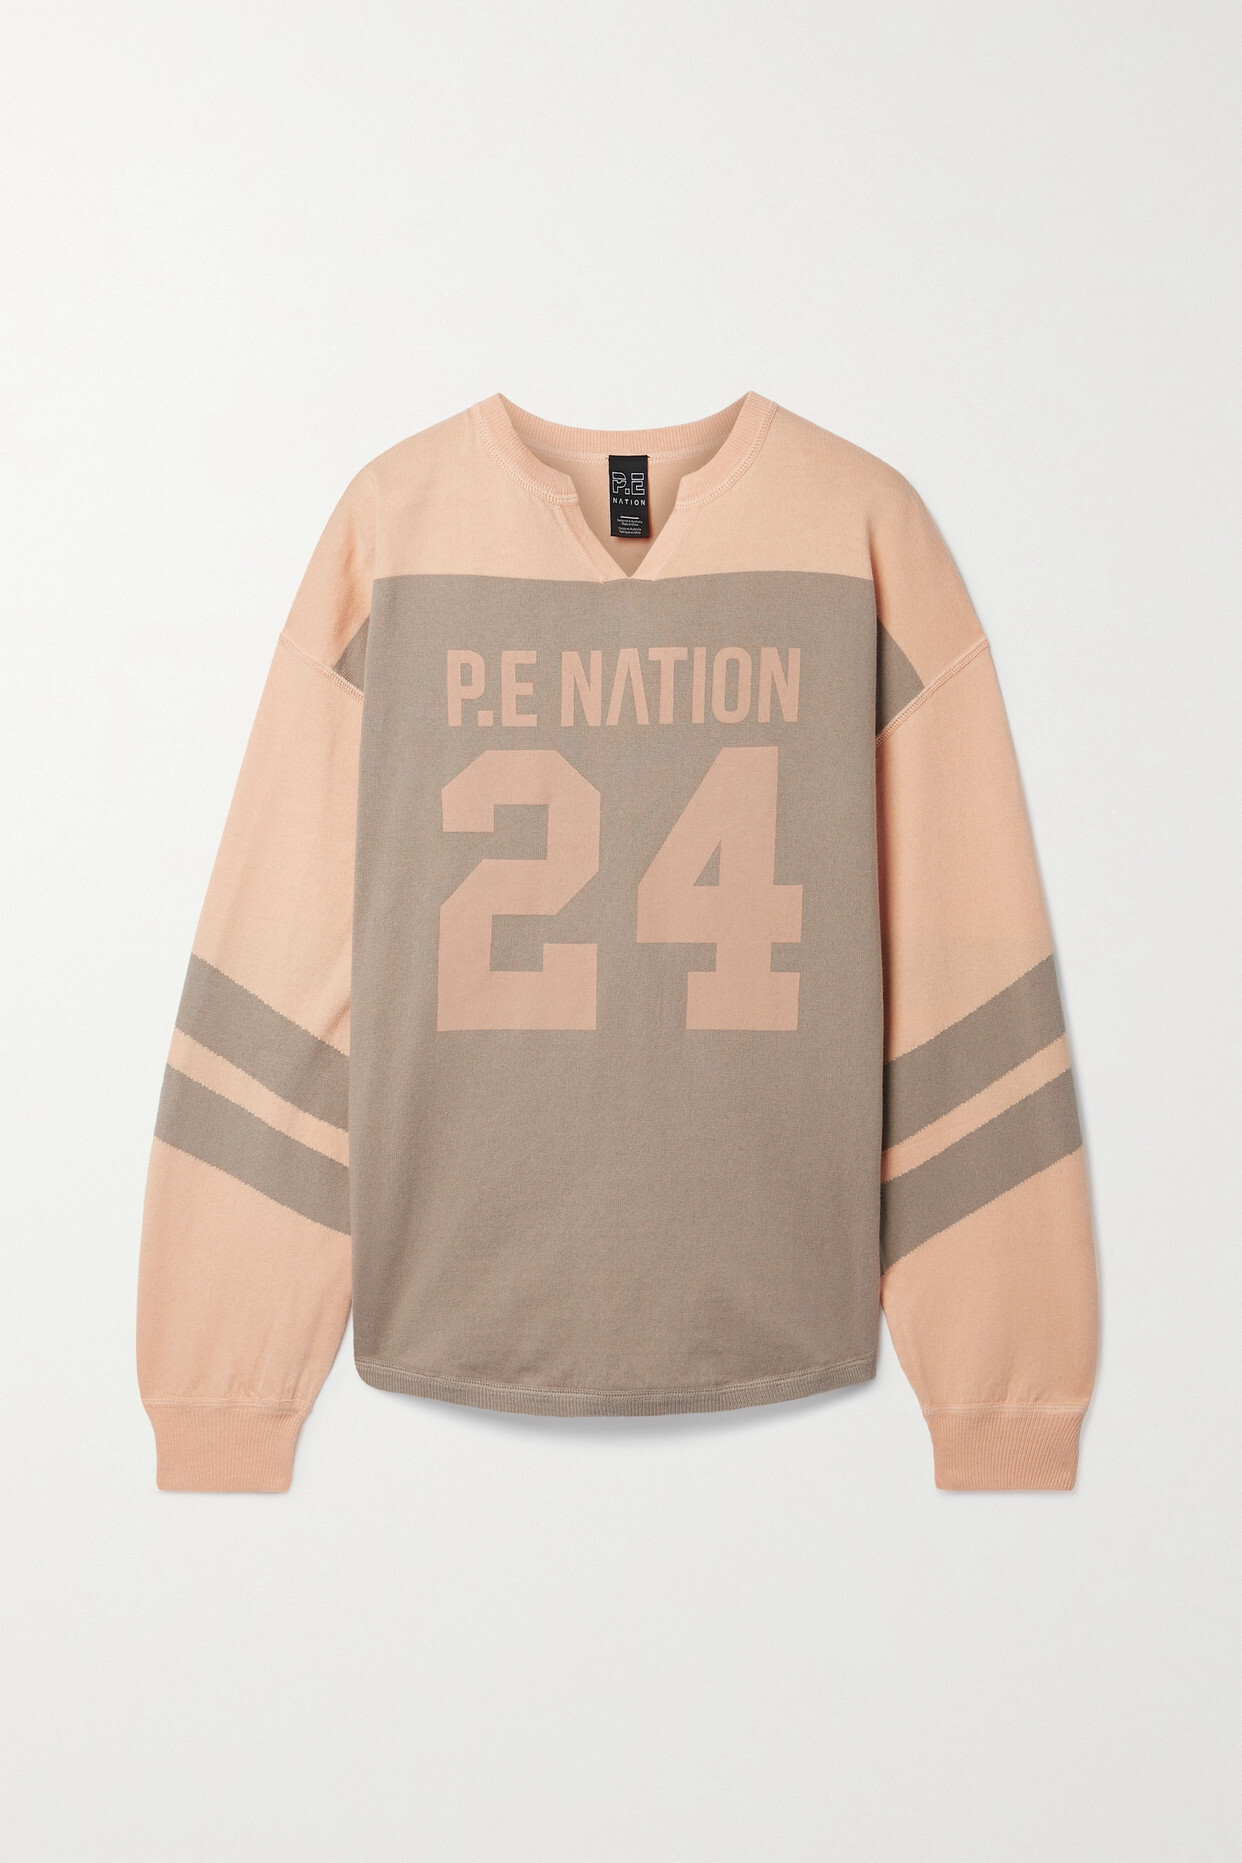 P.E NATION - Downswing Printed Two-tone Cotton Sweater - Neutrals